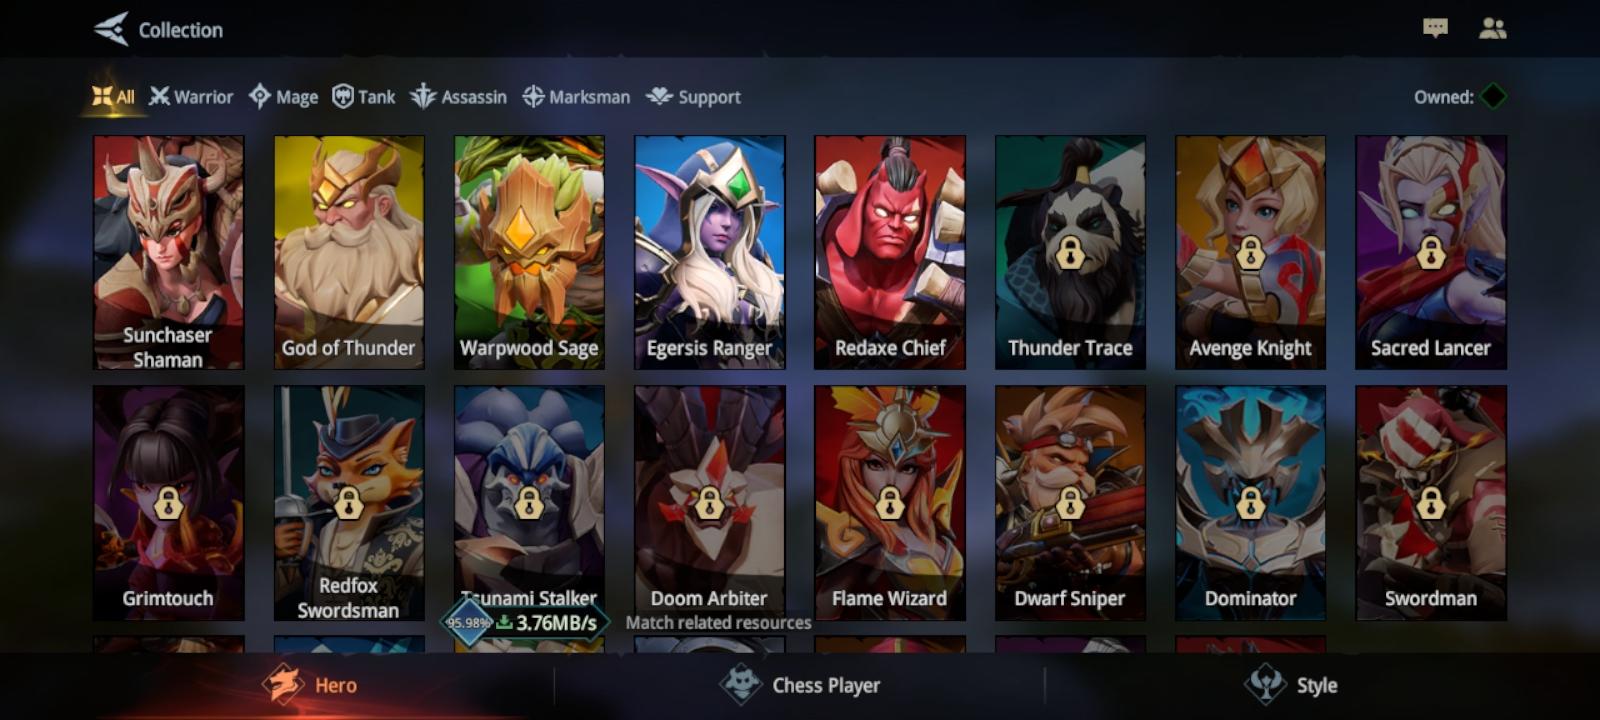 New Update Auto Chess Experimental Server Review : ❤️❤️❤️❤️🤍 - Auto Chess  - TapTap